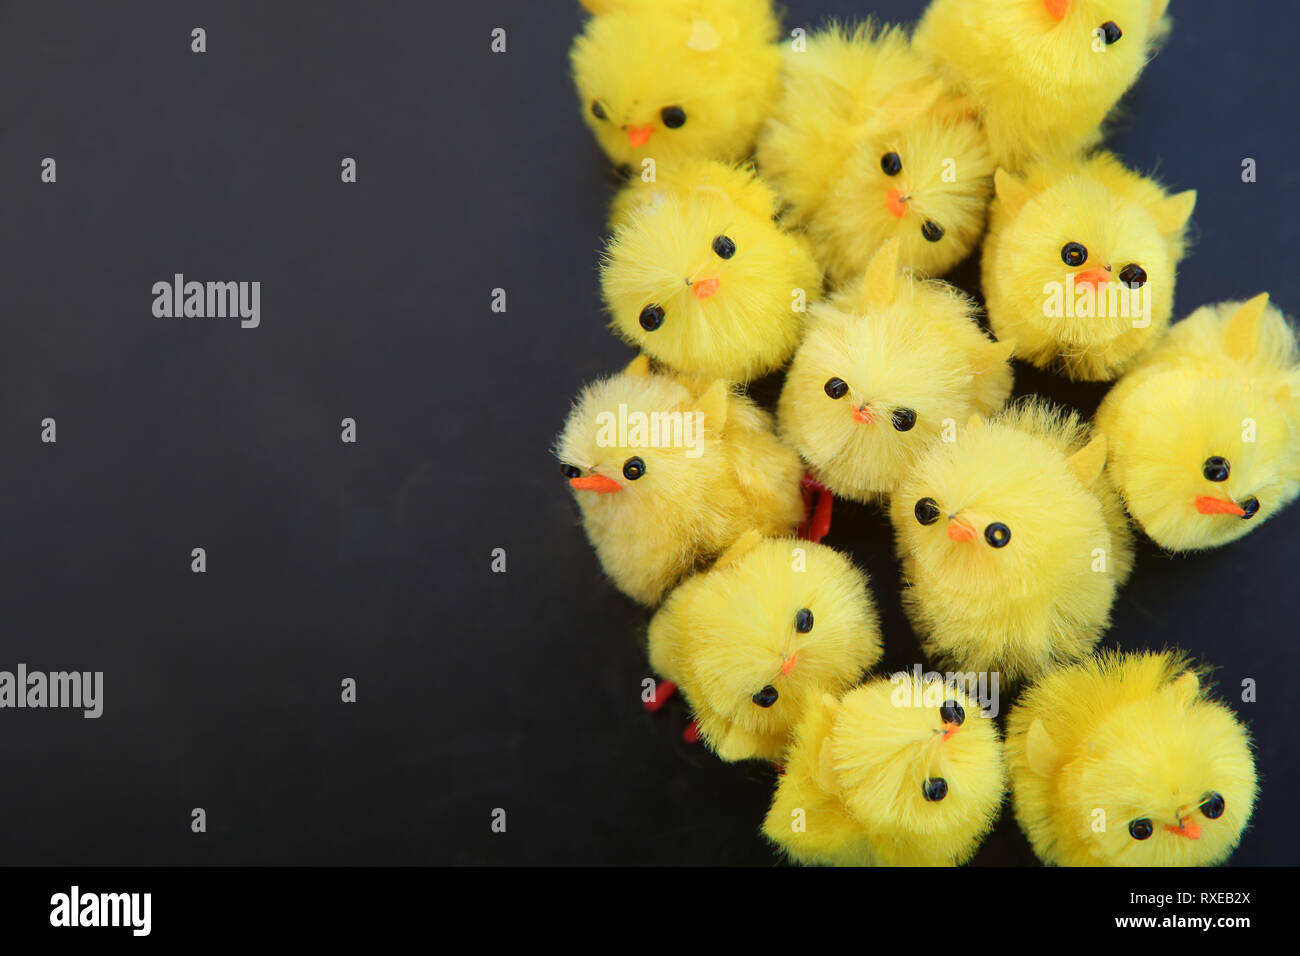 Easter cake decorations yellow fluffy baby chicks ready for easter against a dark background. Stock Photo